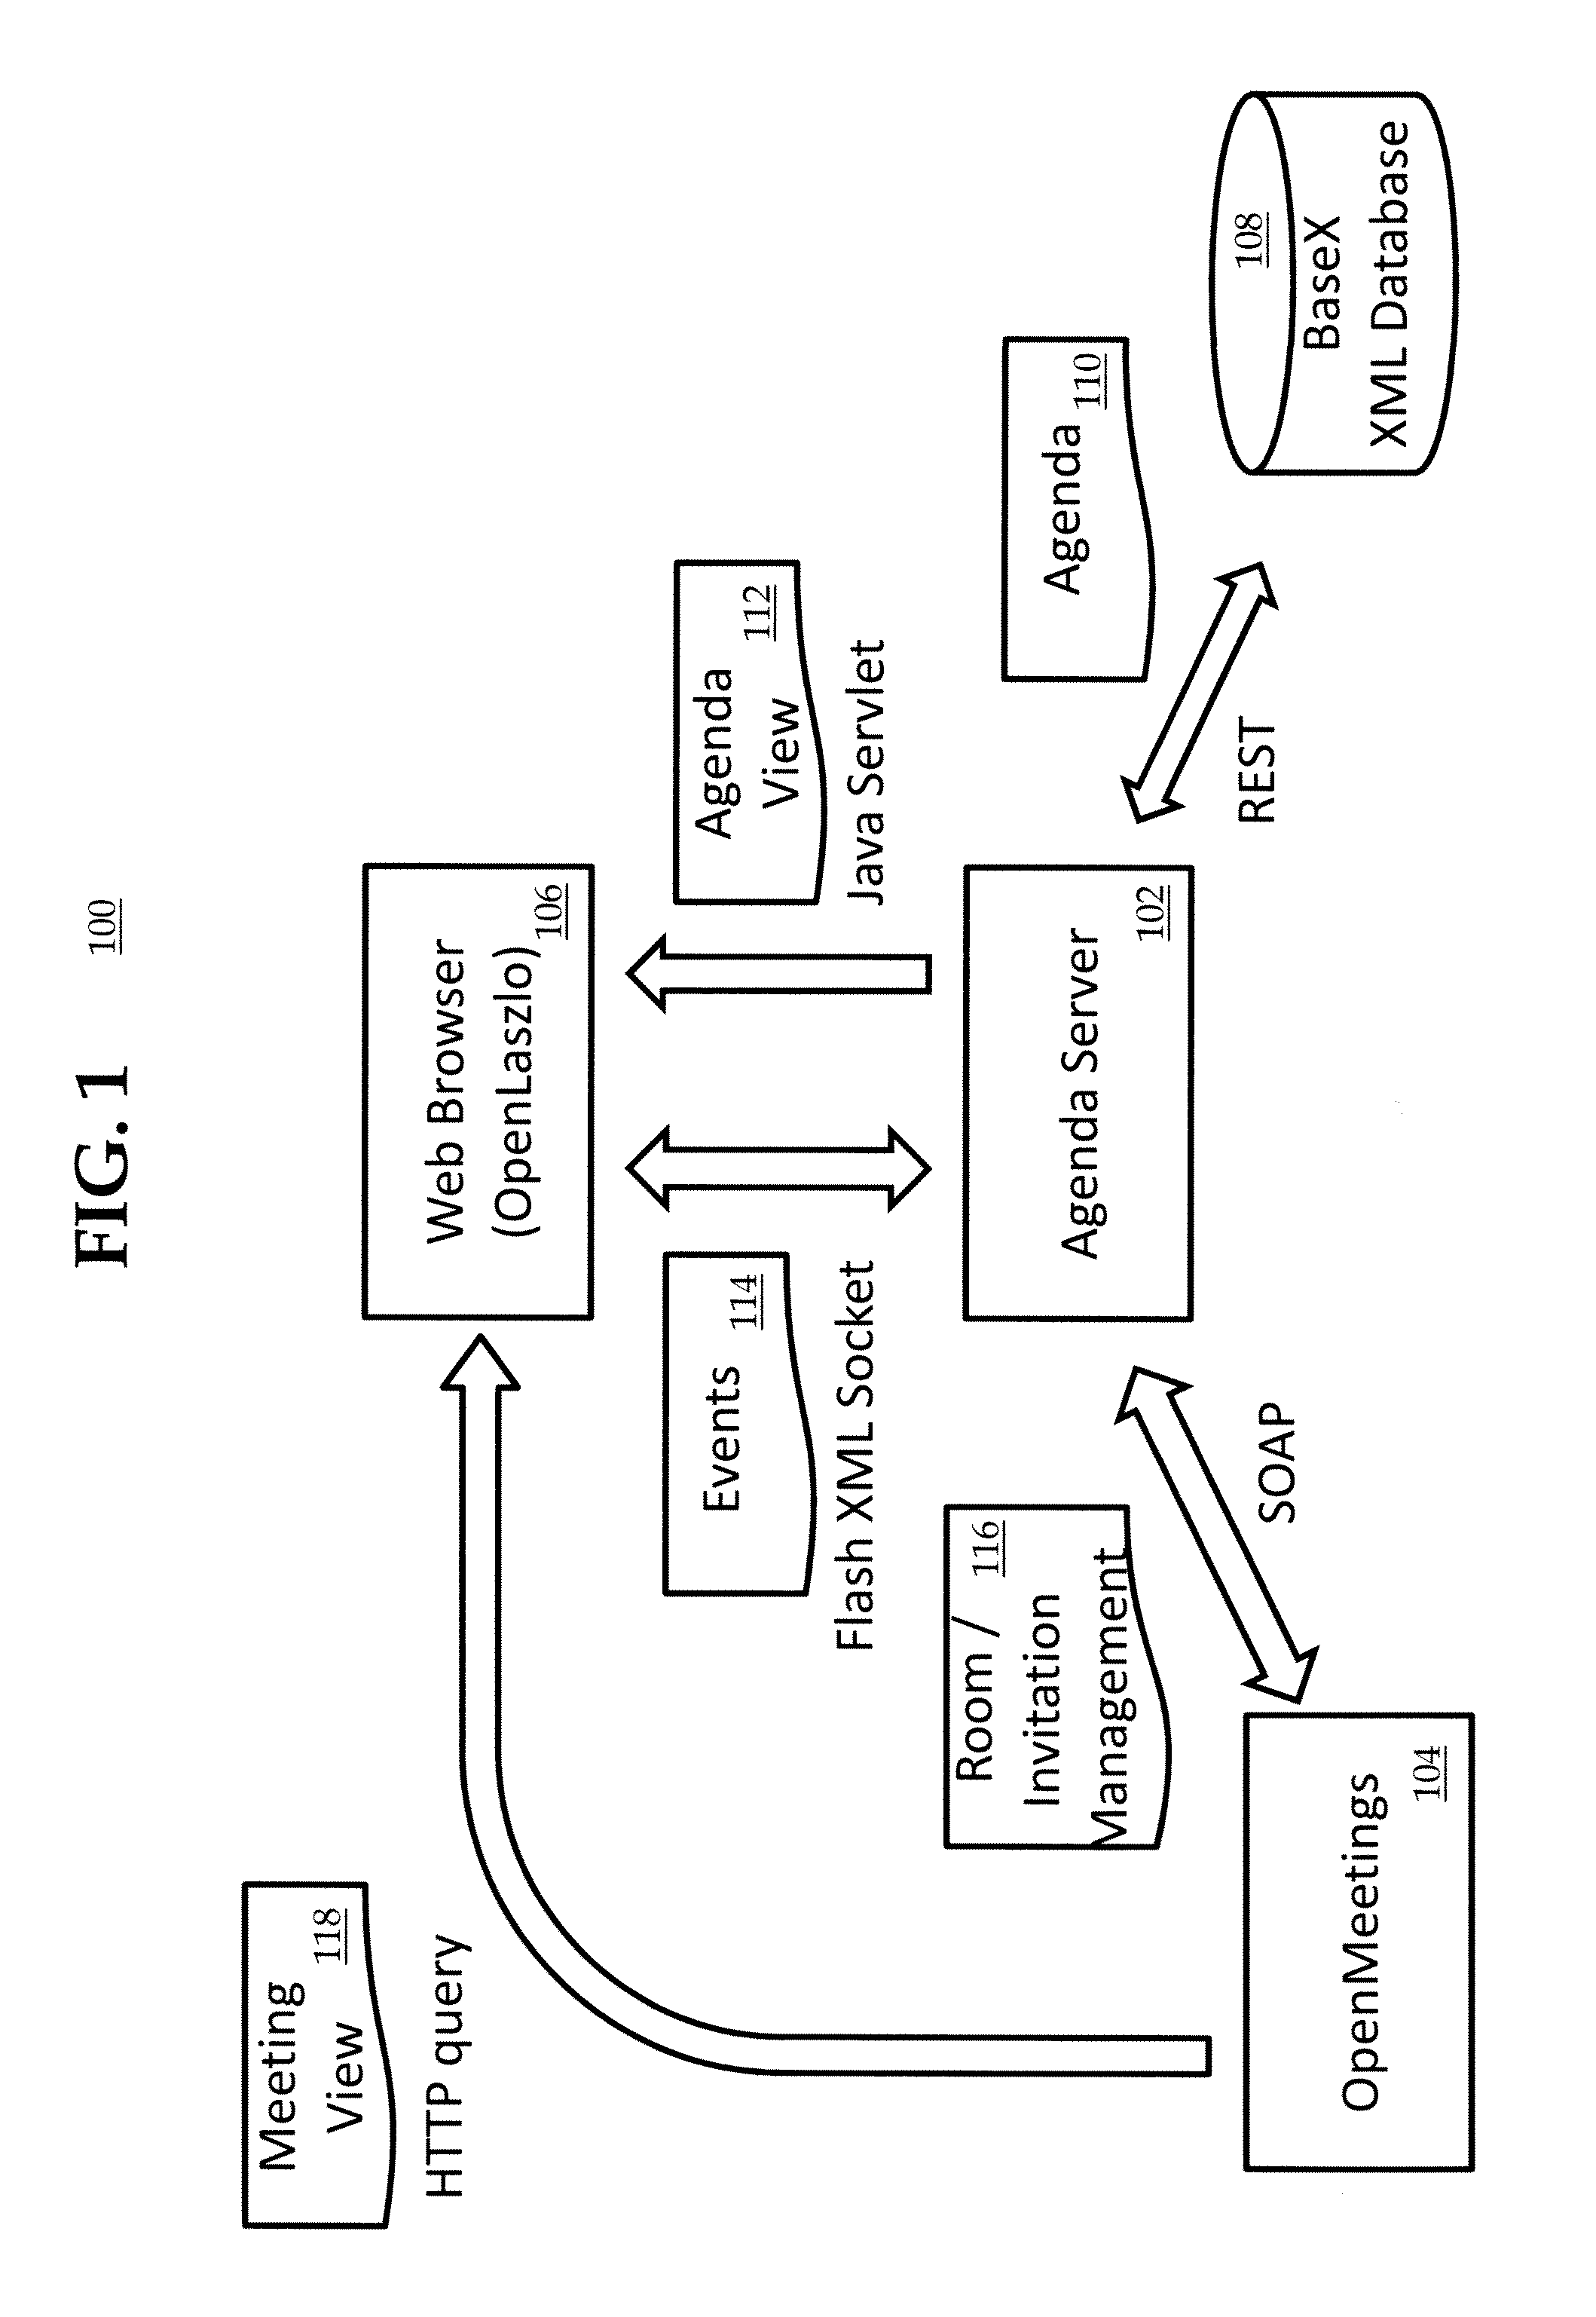 System and method for concurrent electronic conferences